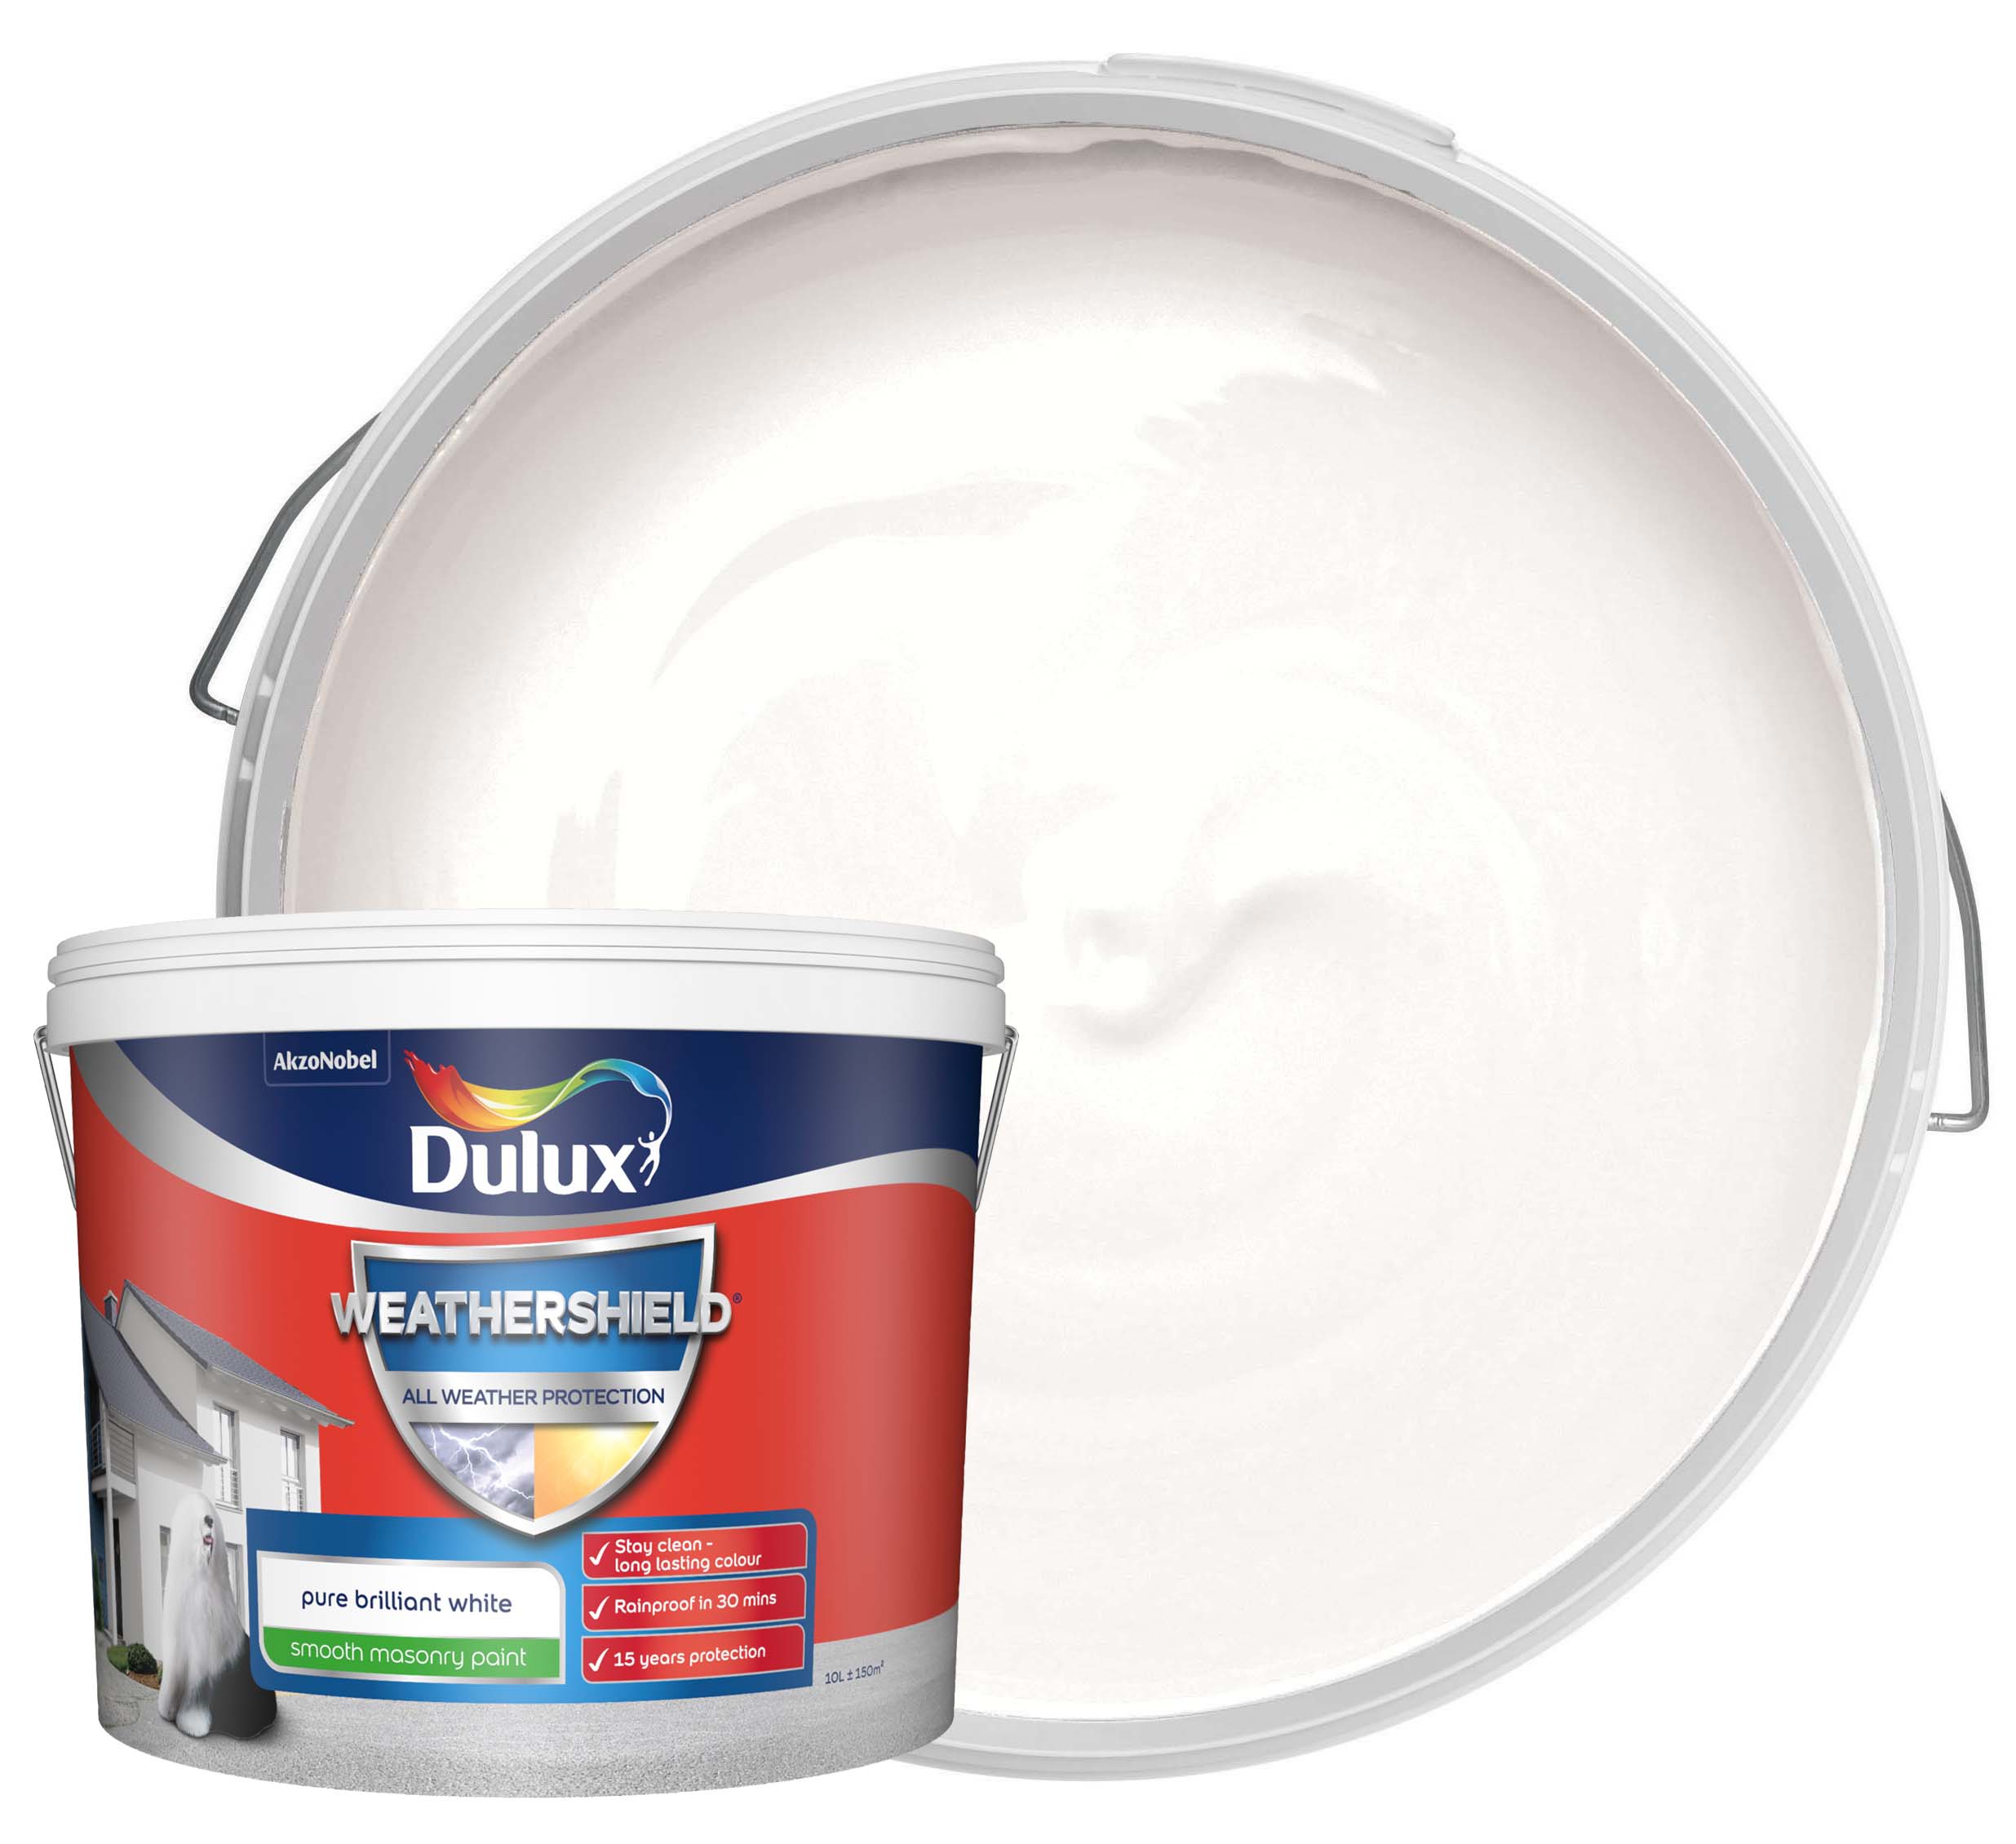 Dulux Weathershield All Weather Purpose Smooth Paint - Pure Brilliant White - 10L